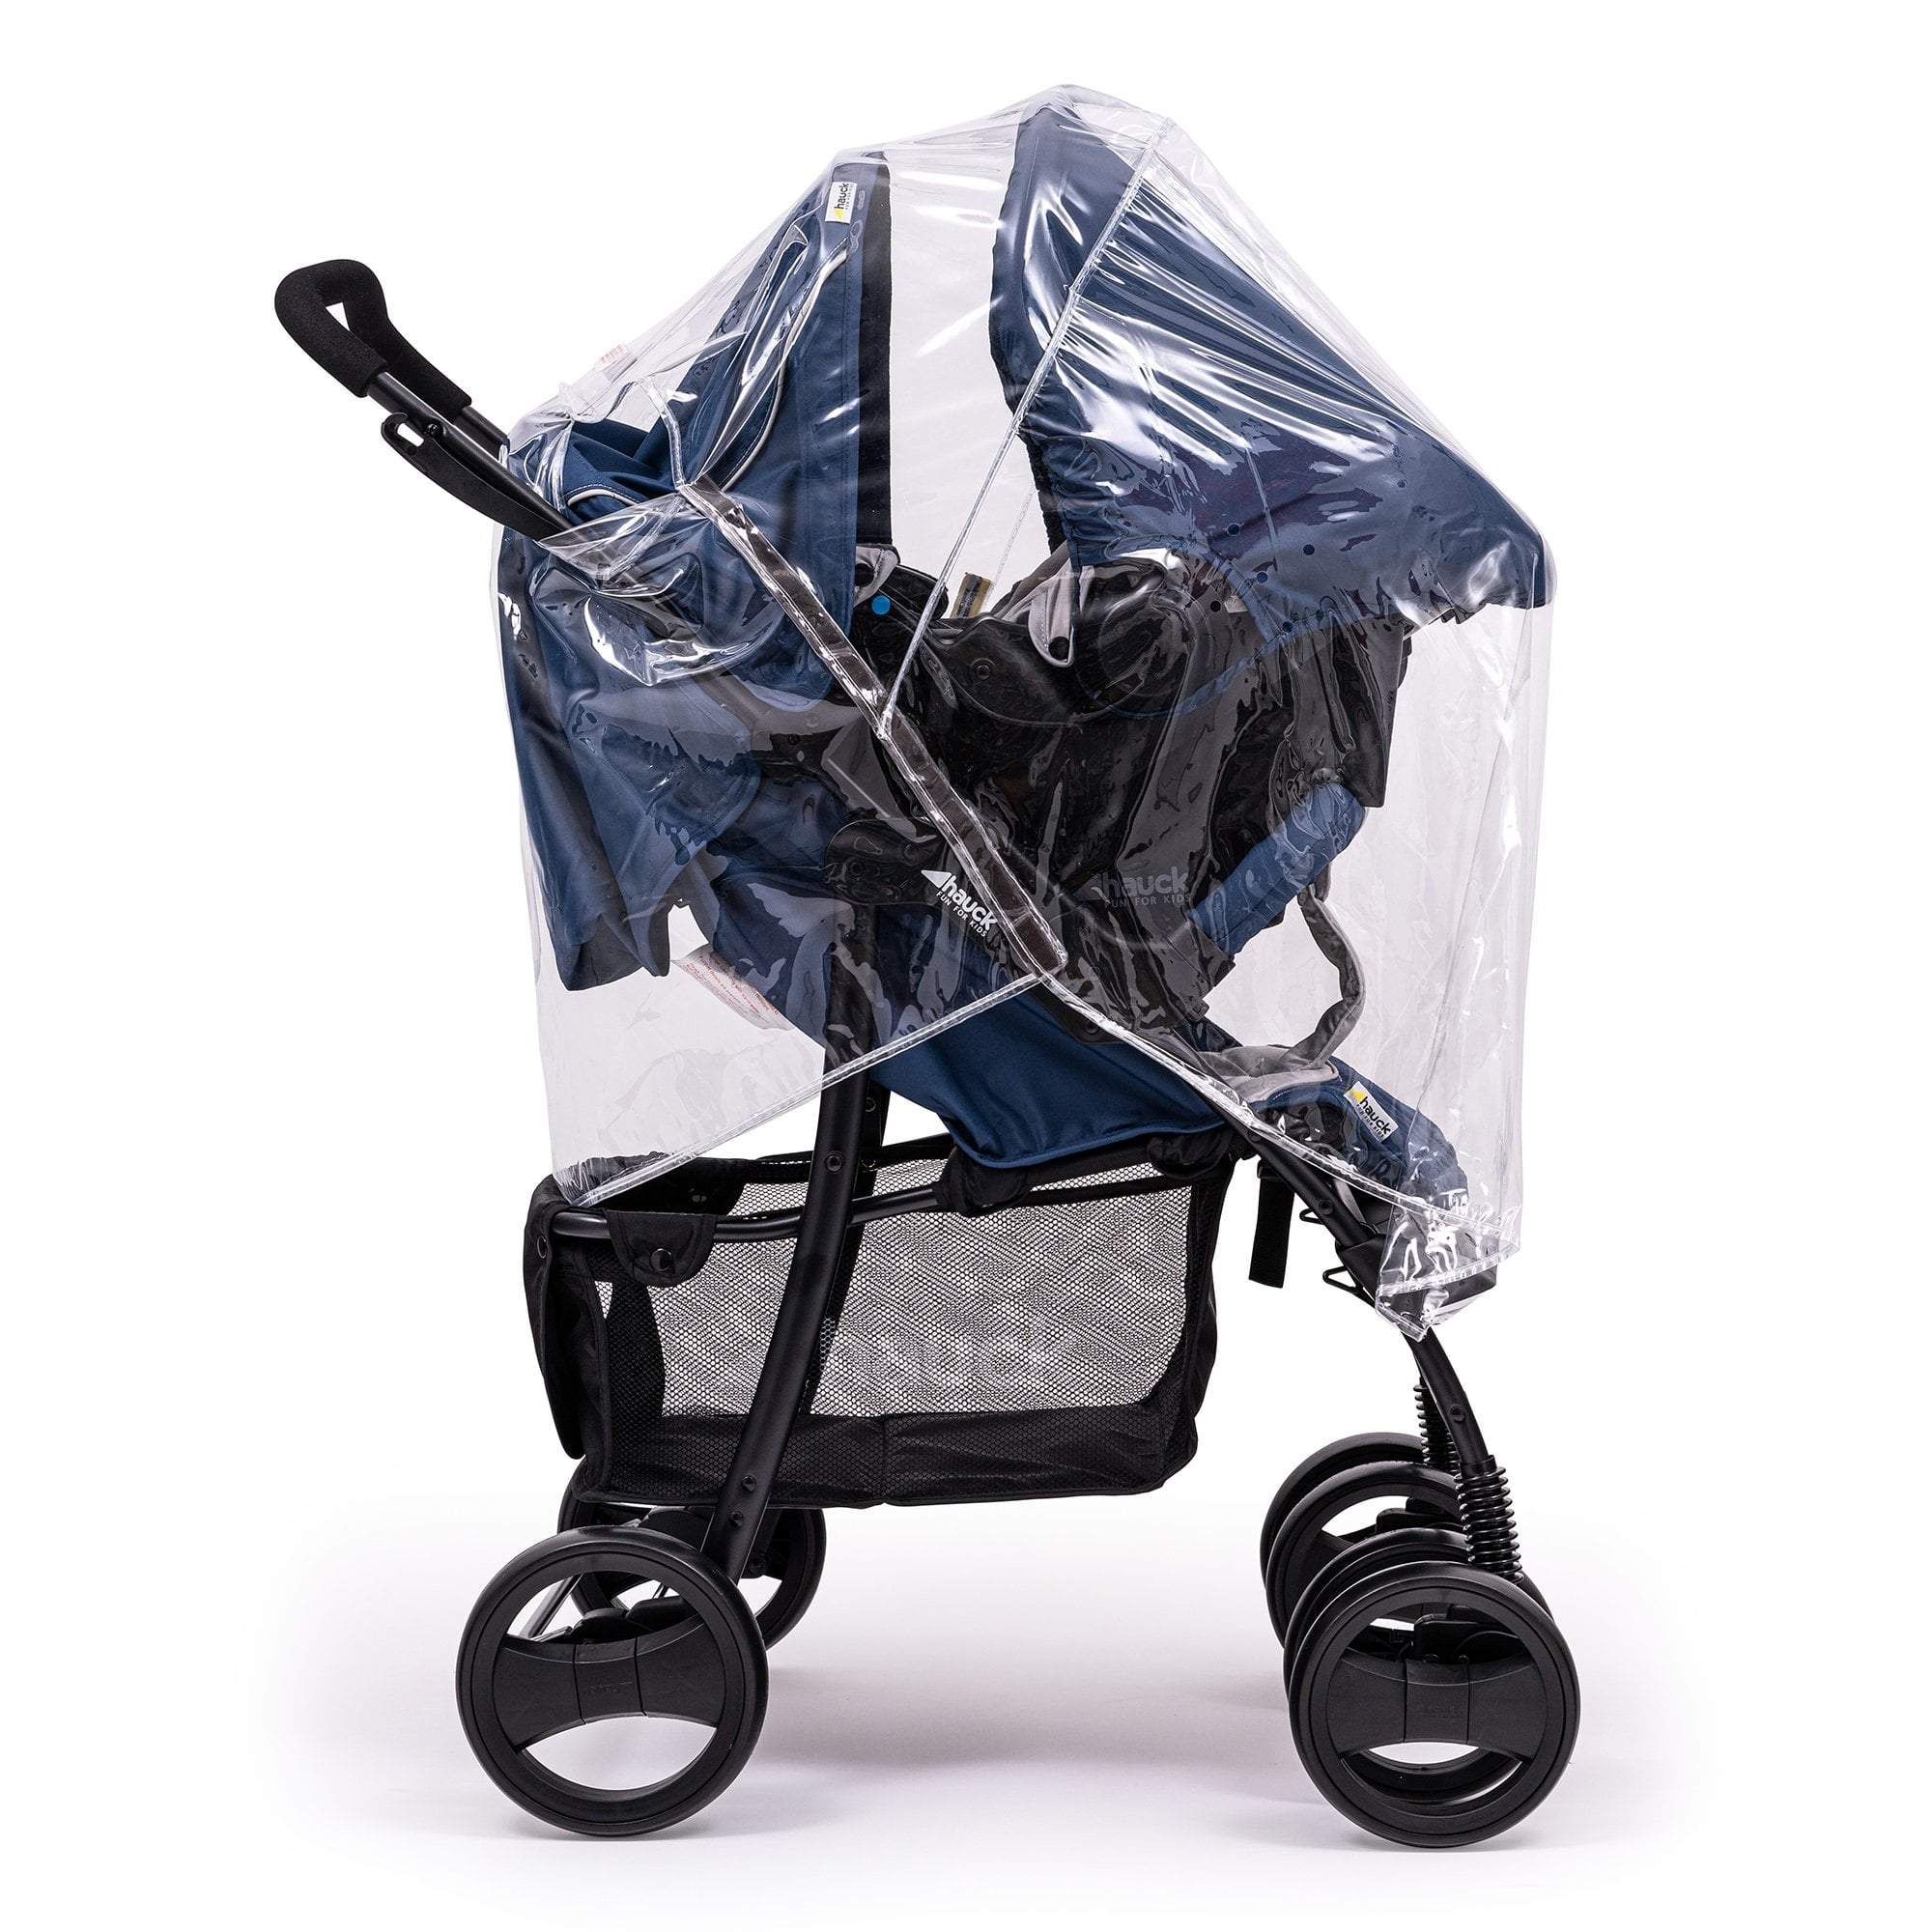 Travel System Raincover Compatible with Roma - Fits All Models - For Your Little One